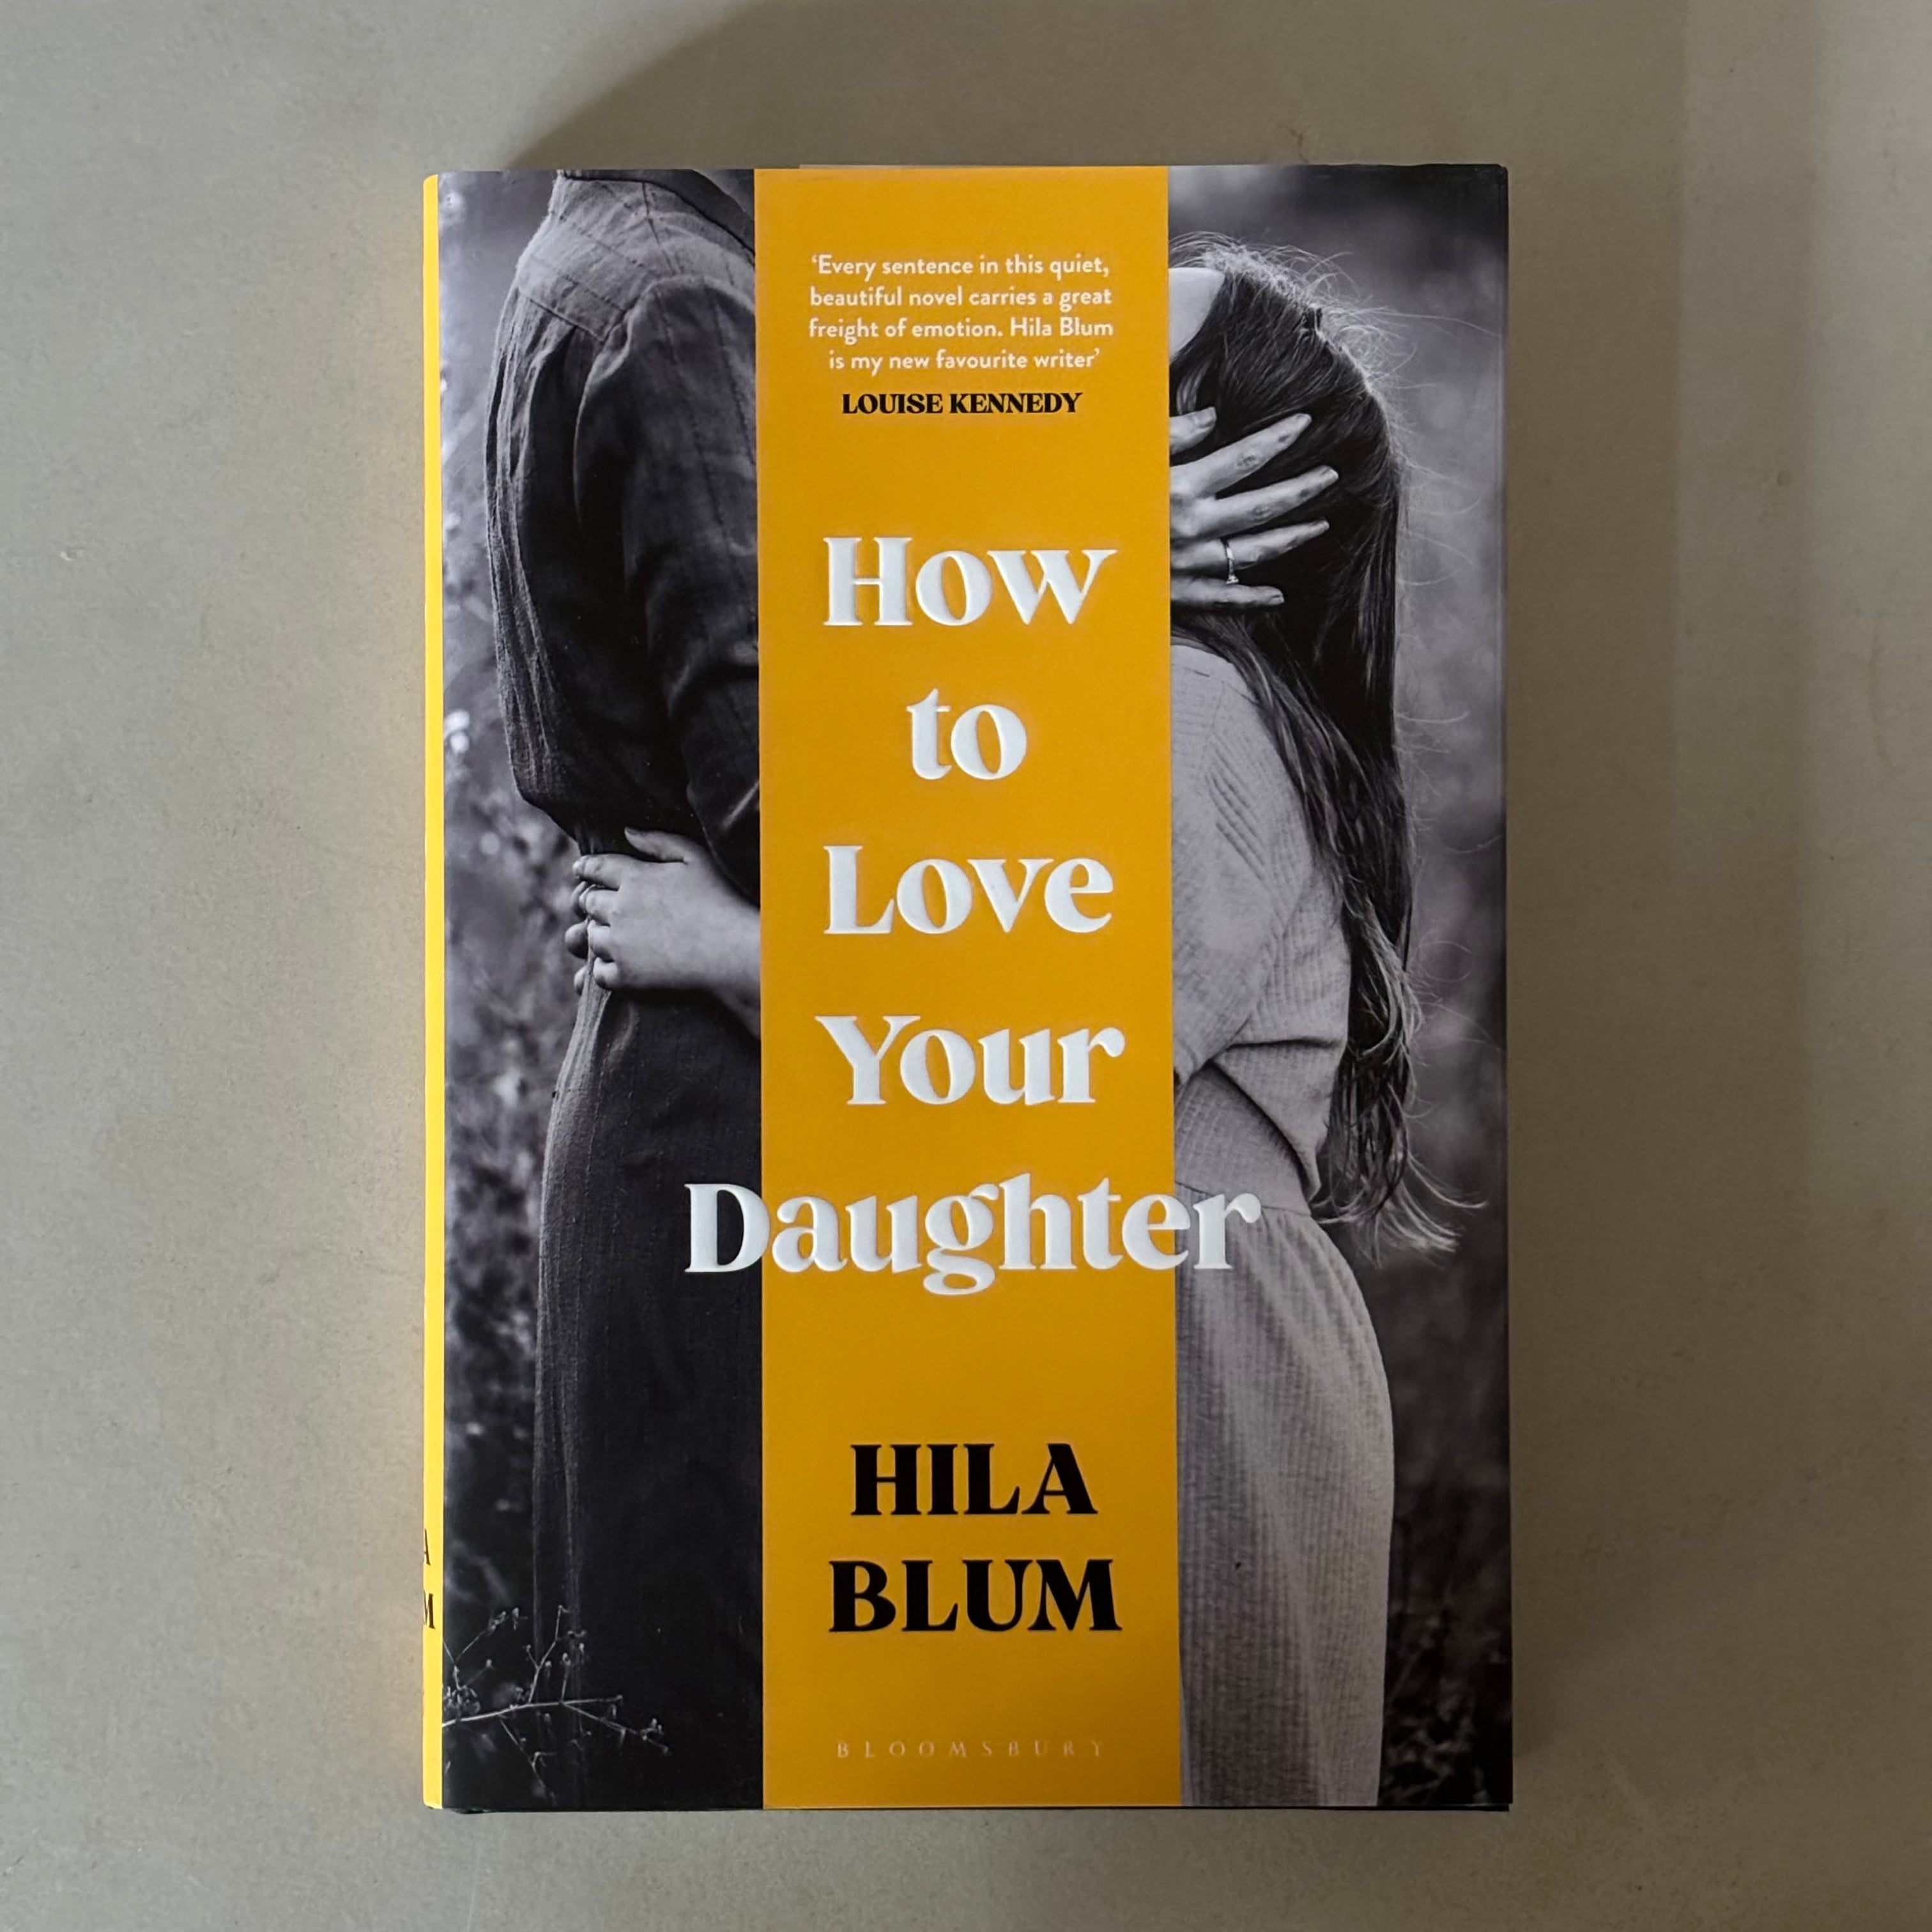 How to Love Your Daughter by Hila Blum